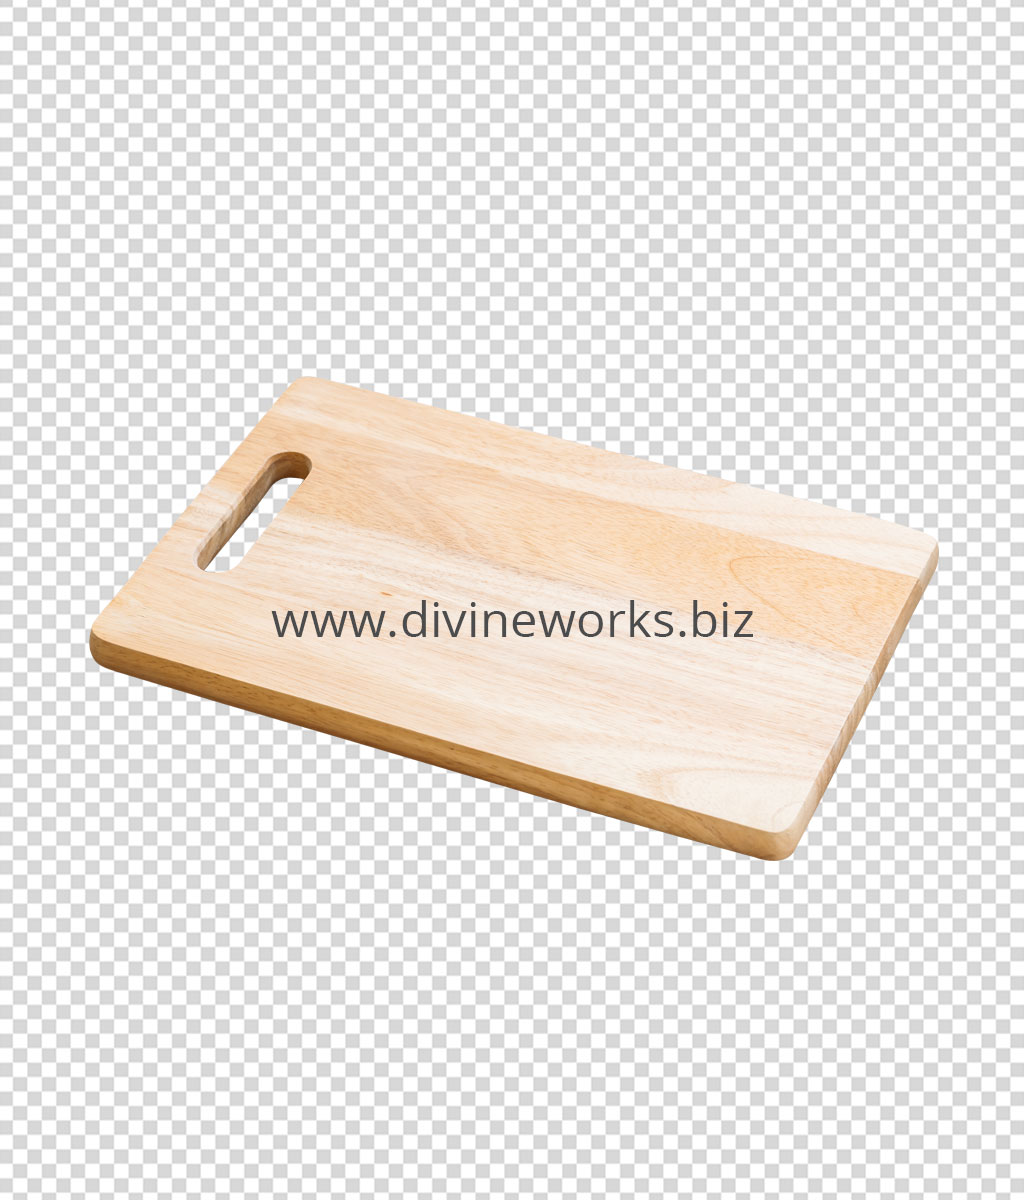 Wooden Cutting Board Free Png Images